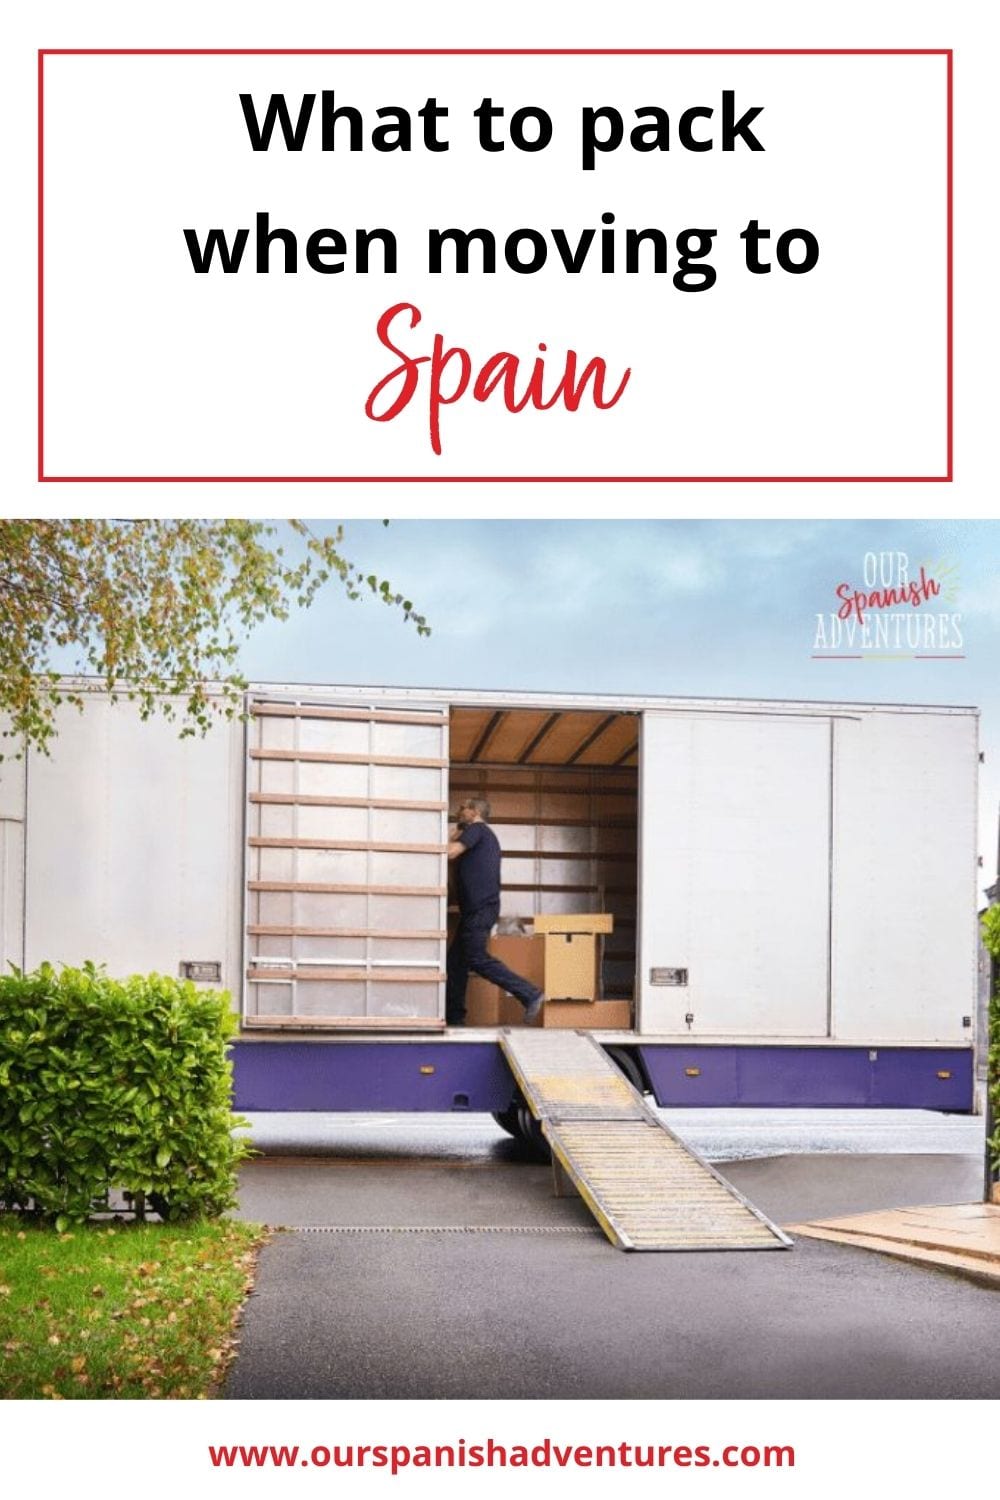 What to pack when moving to Spain | Our Spanish Adventures